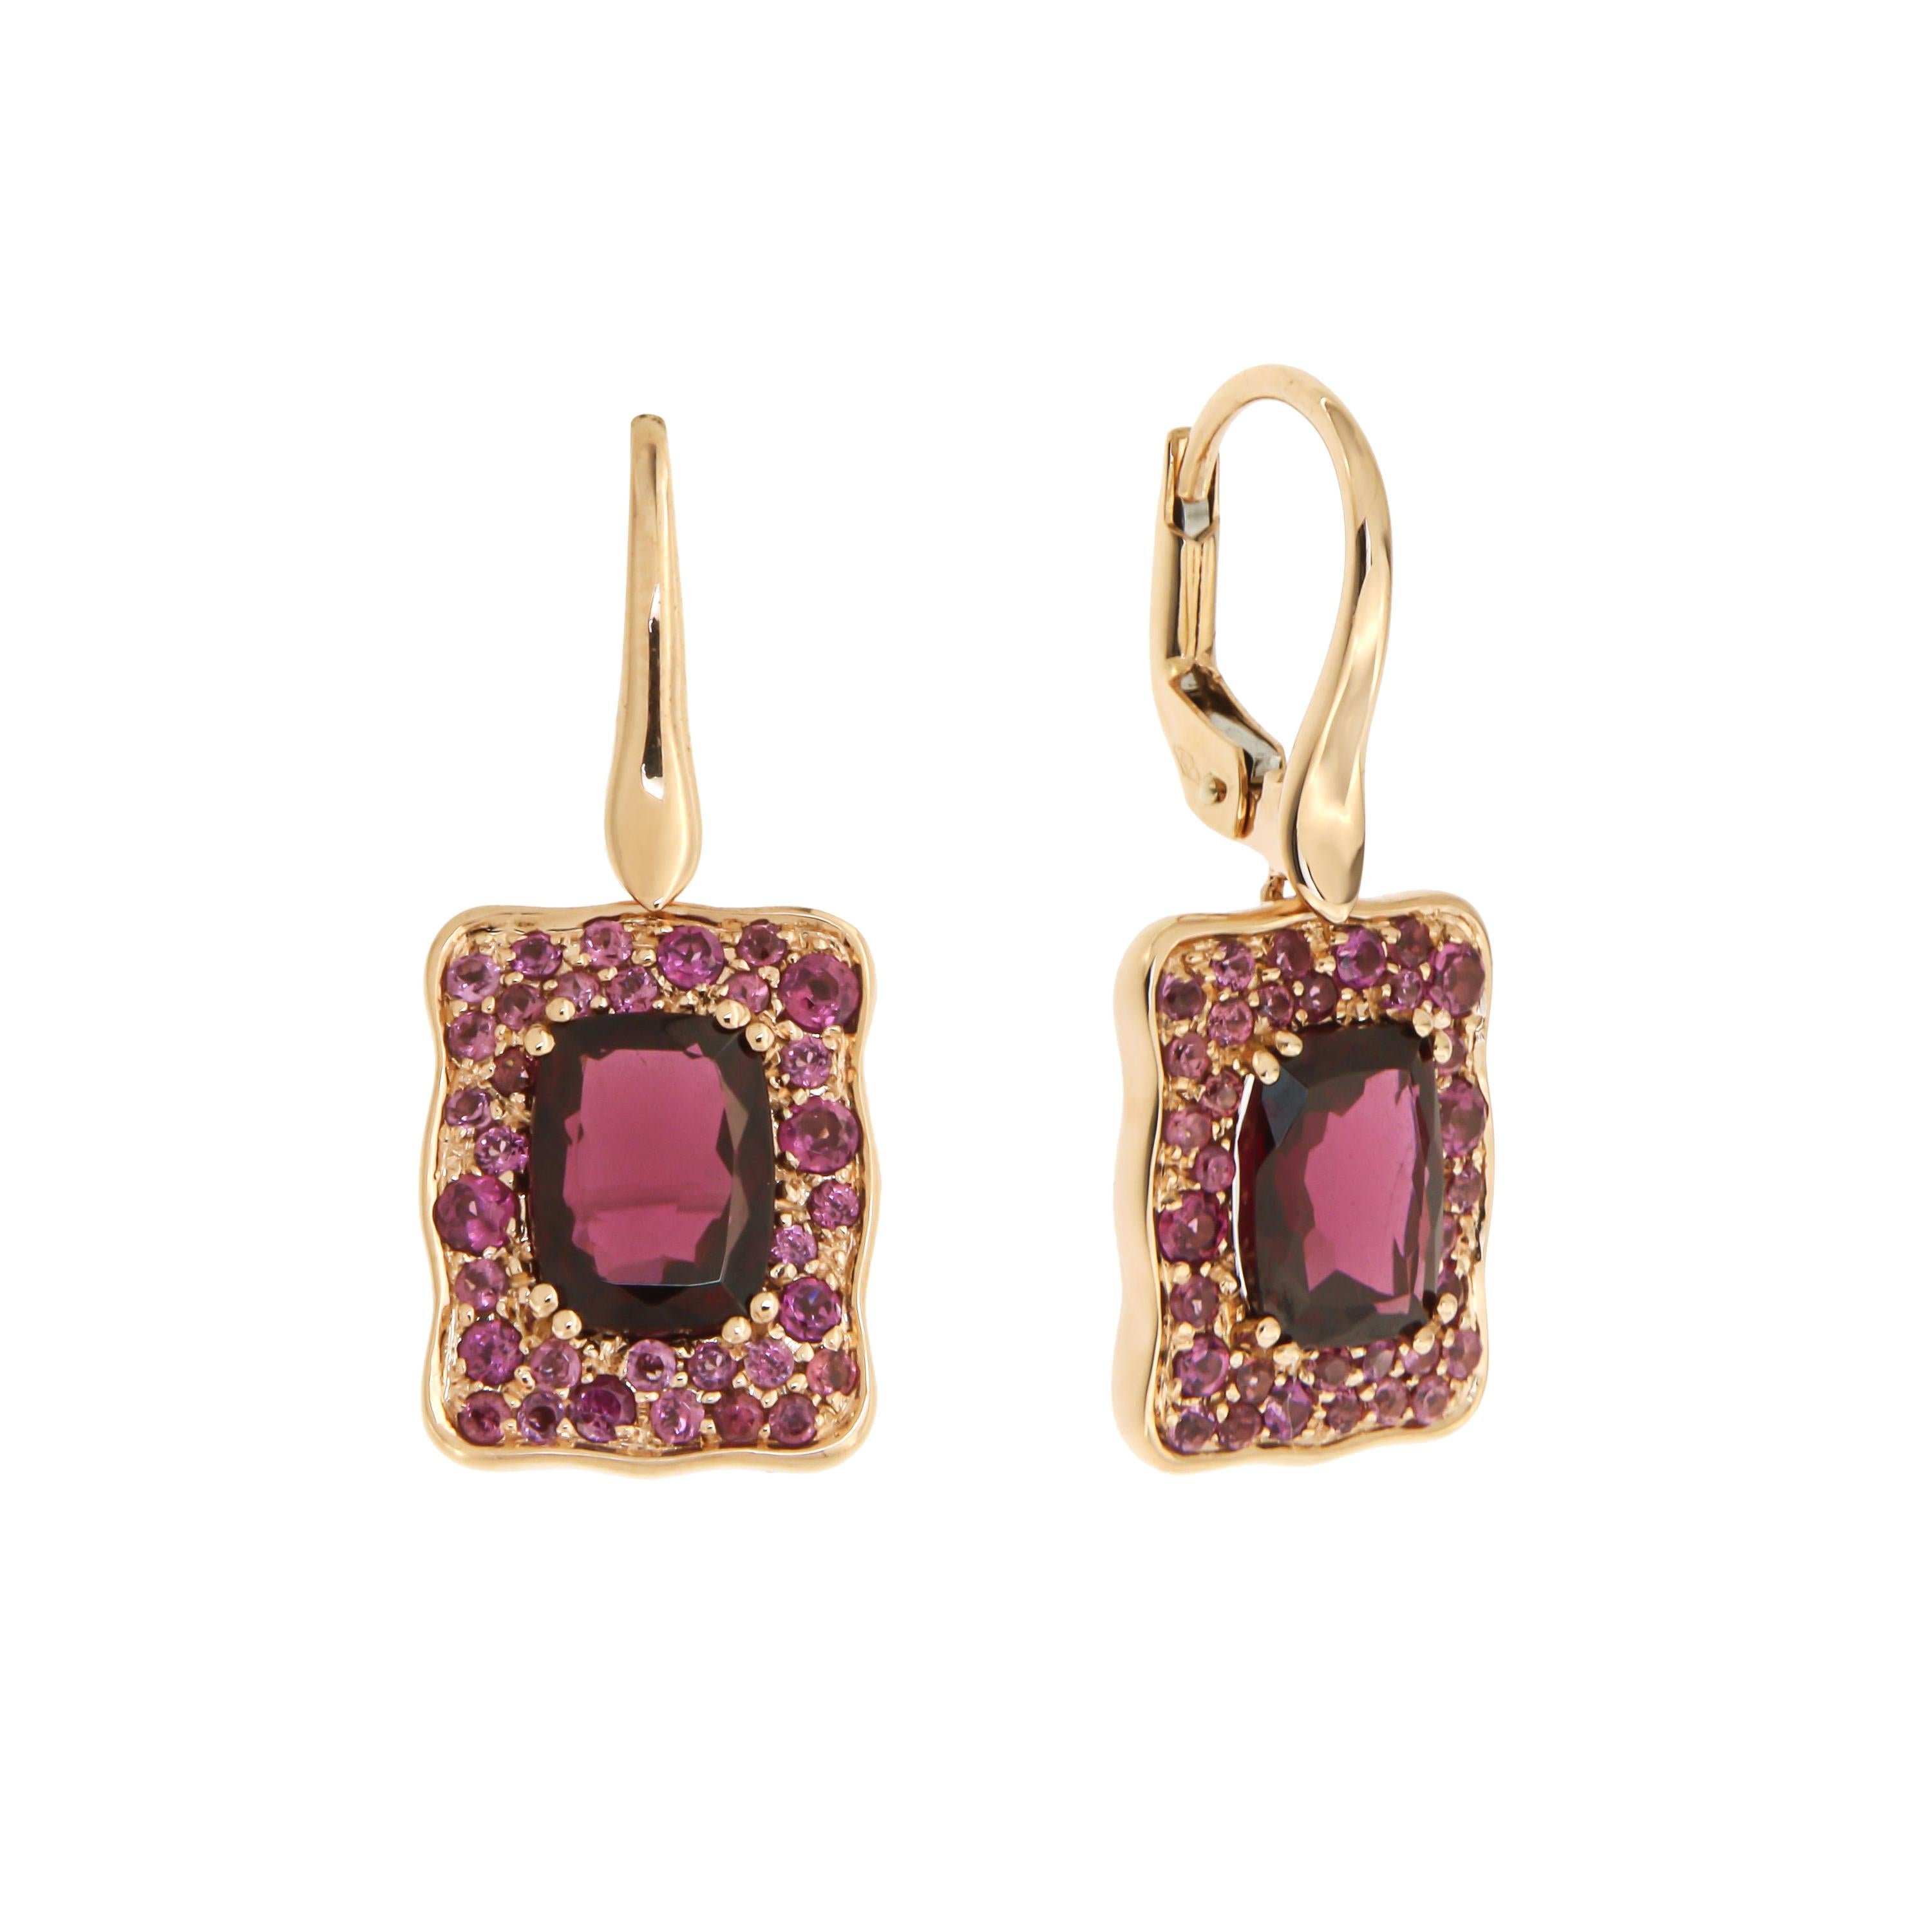 Stylish 18K Rhodolite Rose Gold Lever-Back Earrings for Her Made in Italy For Sale